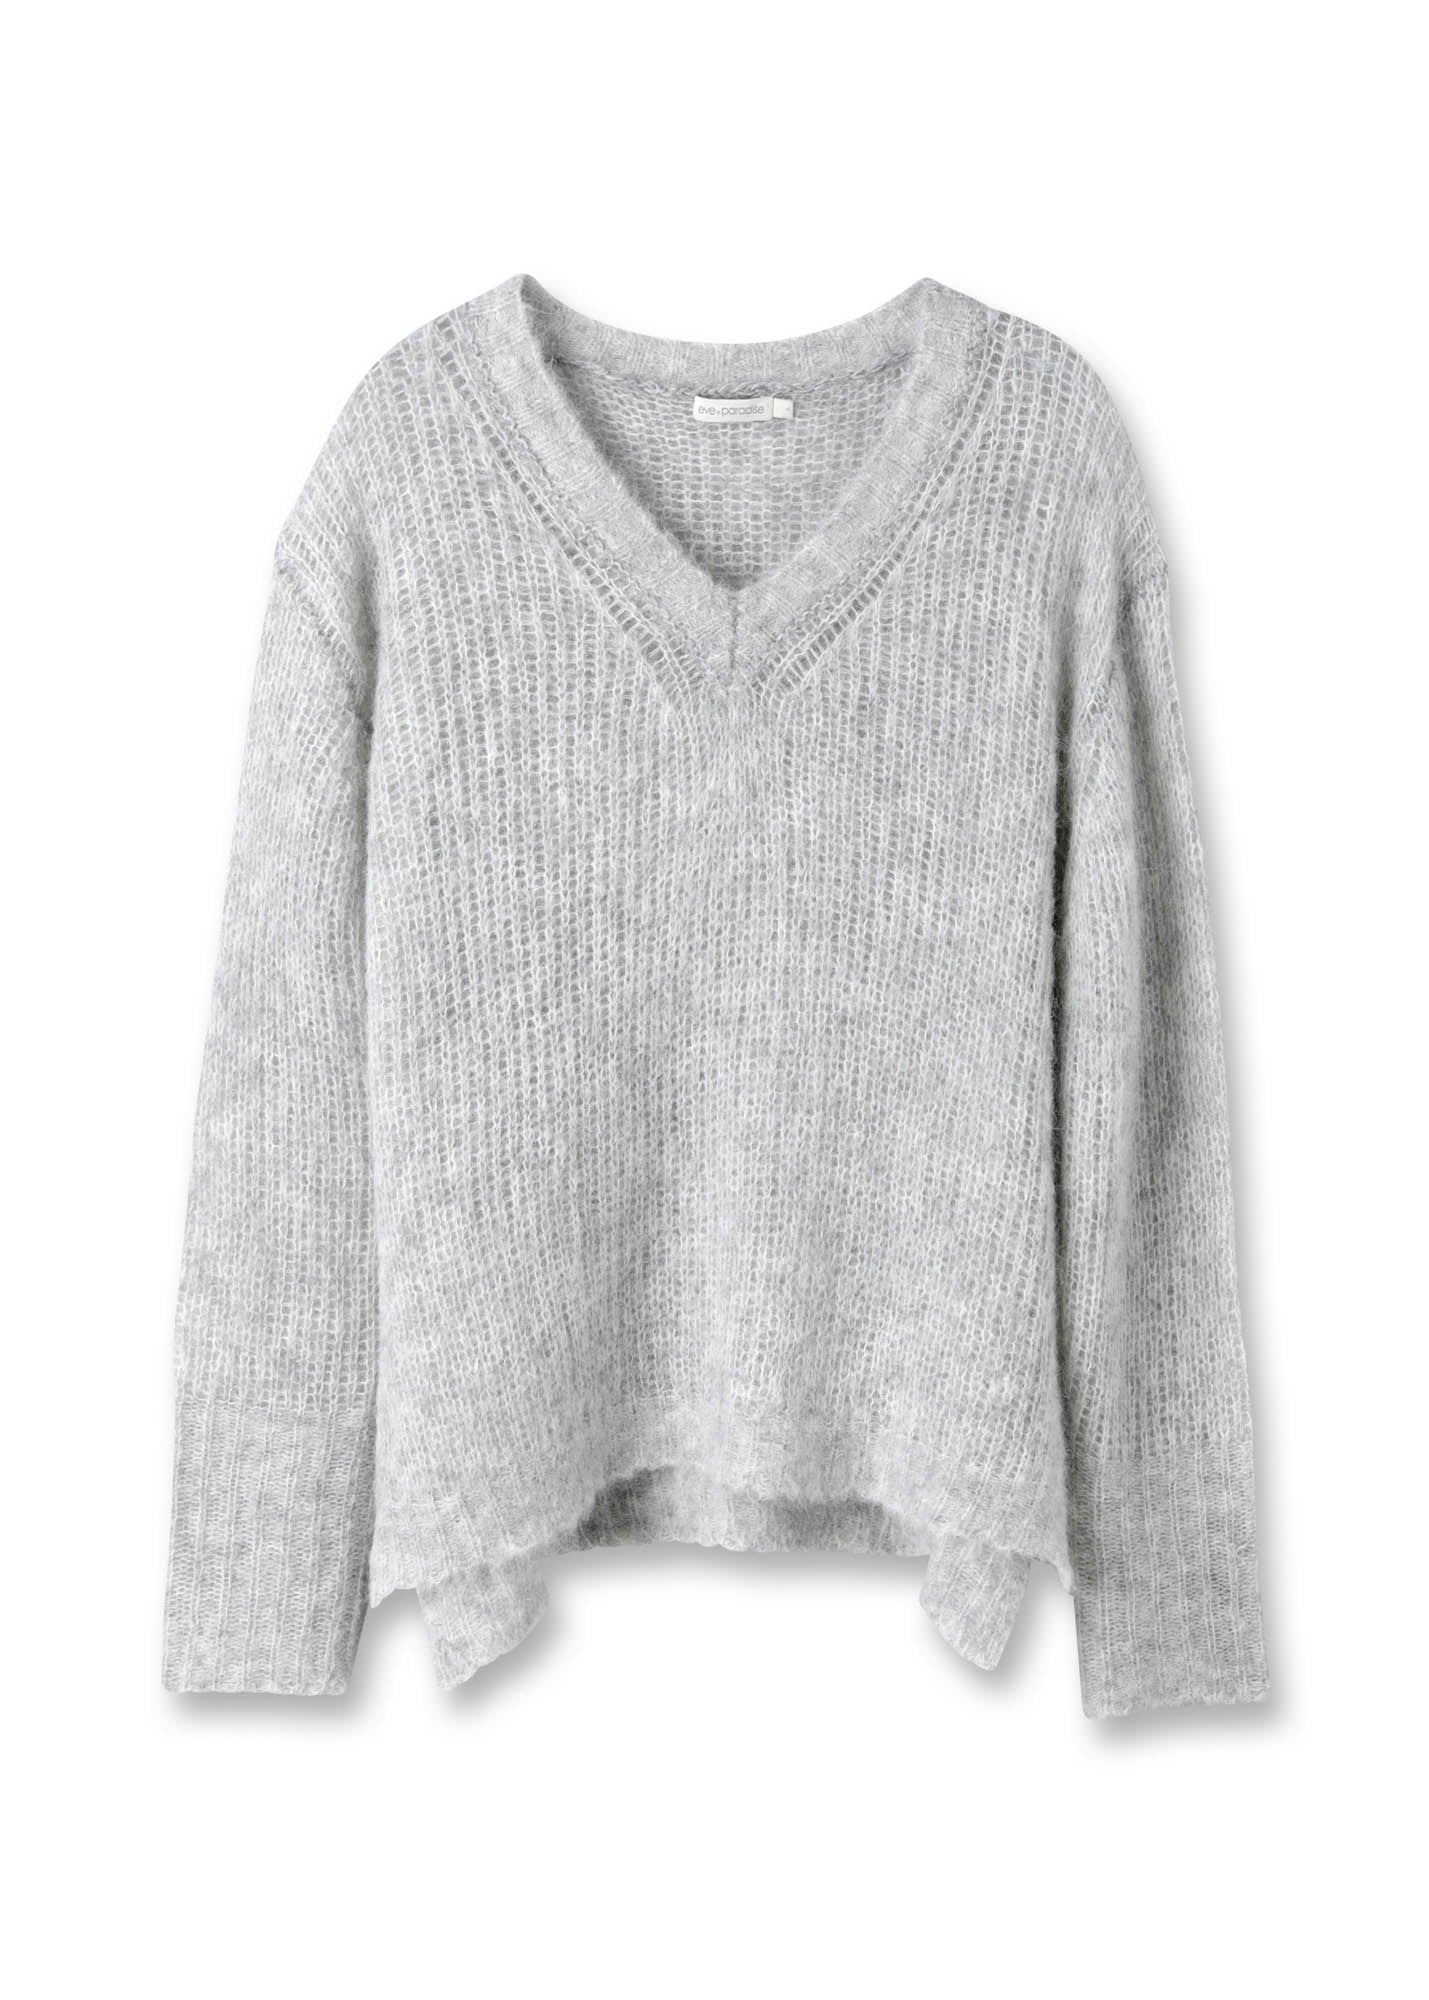 Pullover Modell "Tine"